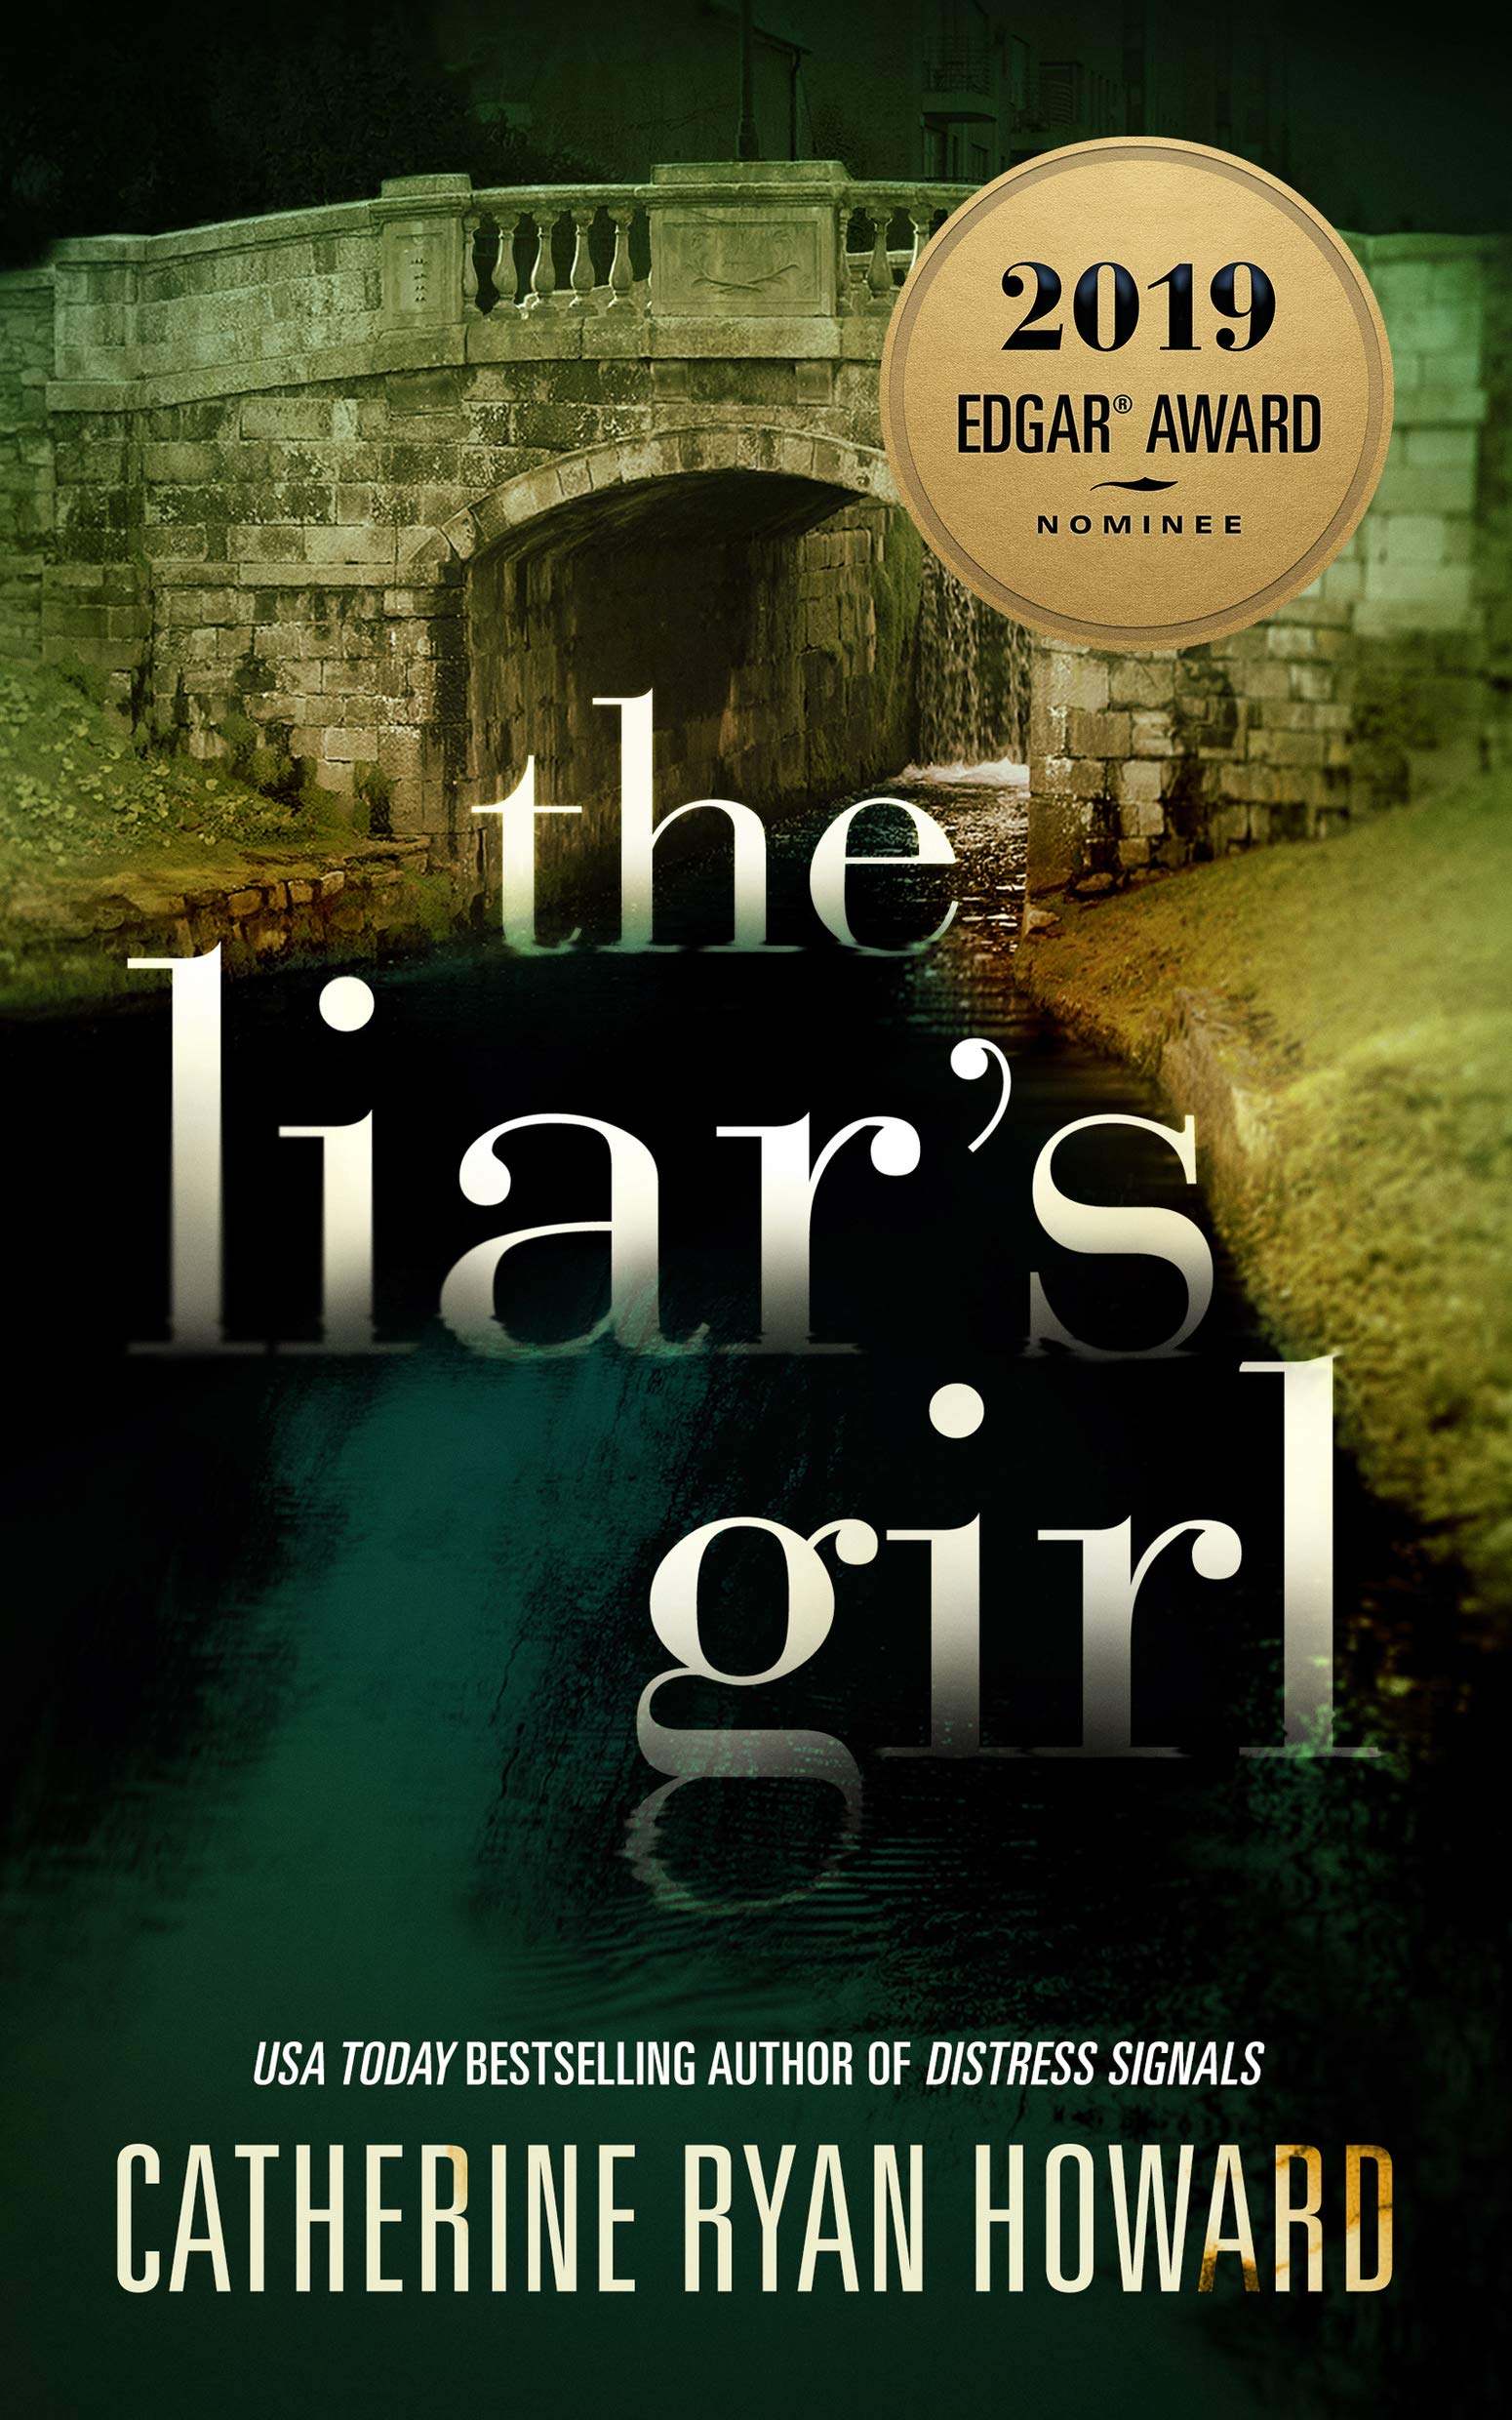 Image for "The Liar’s Girl"